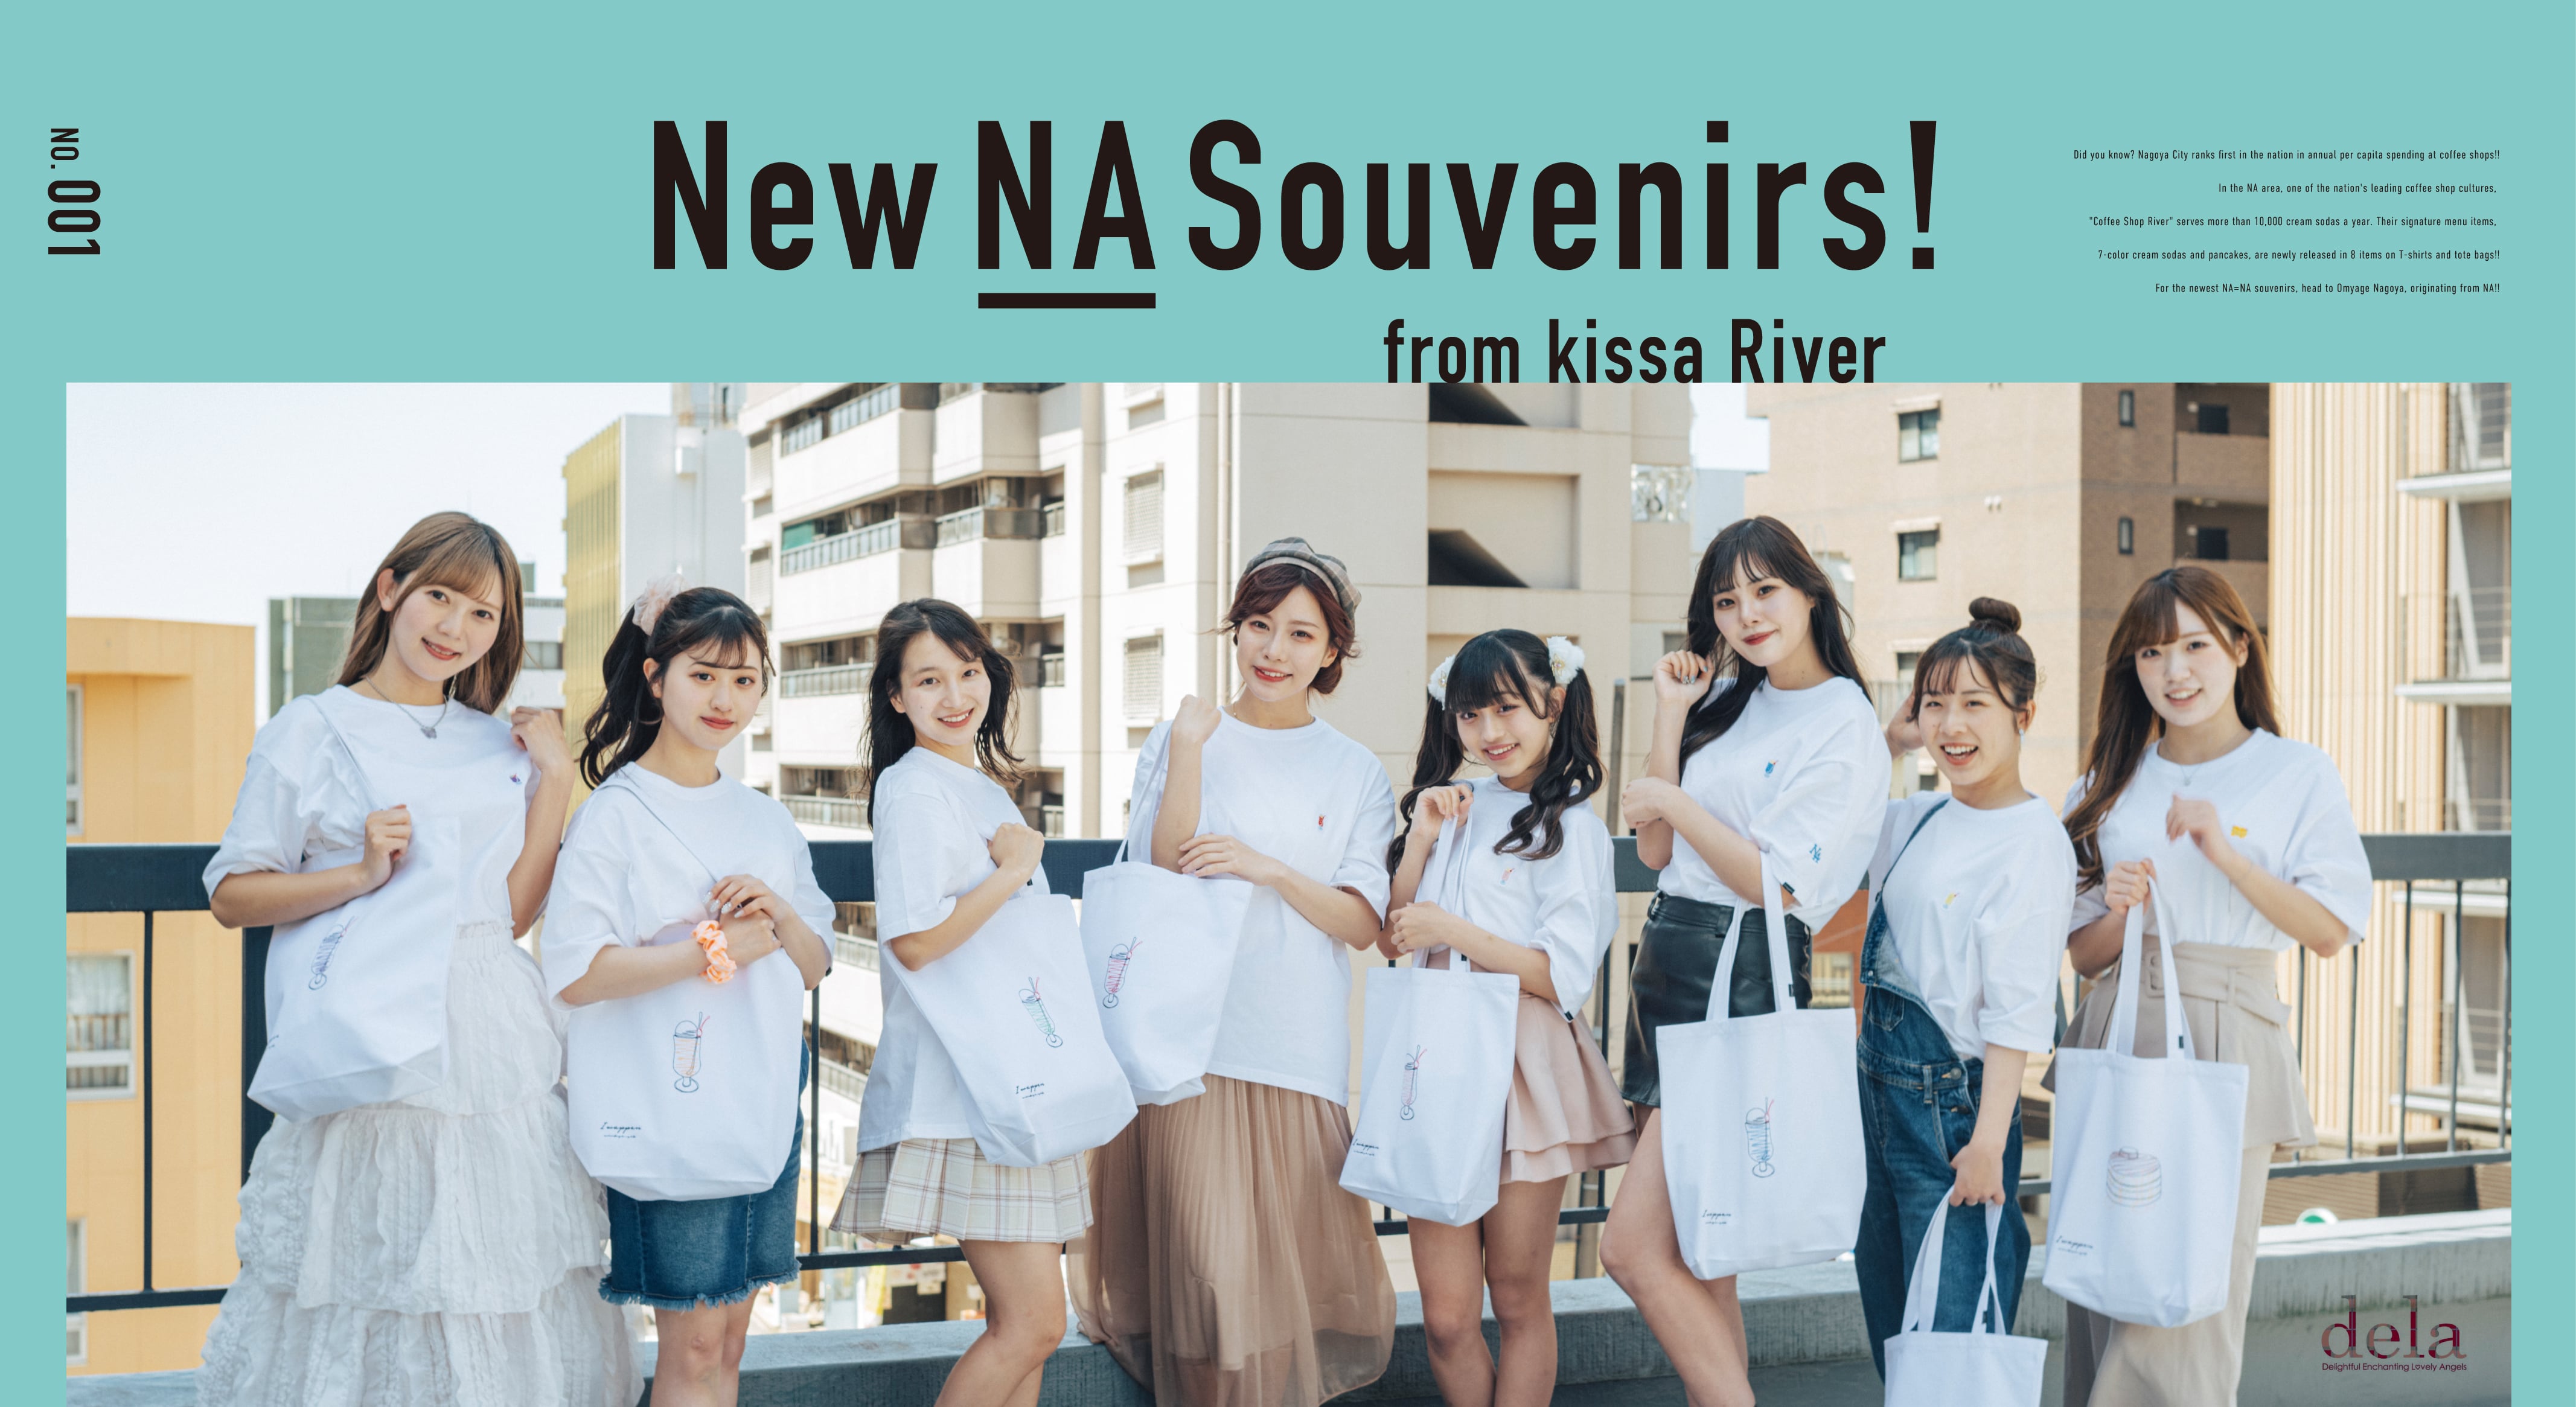 New NA Souvenirs! from kissa River